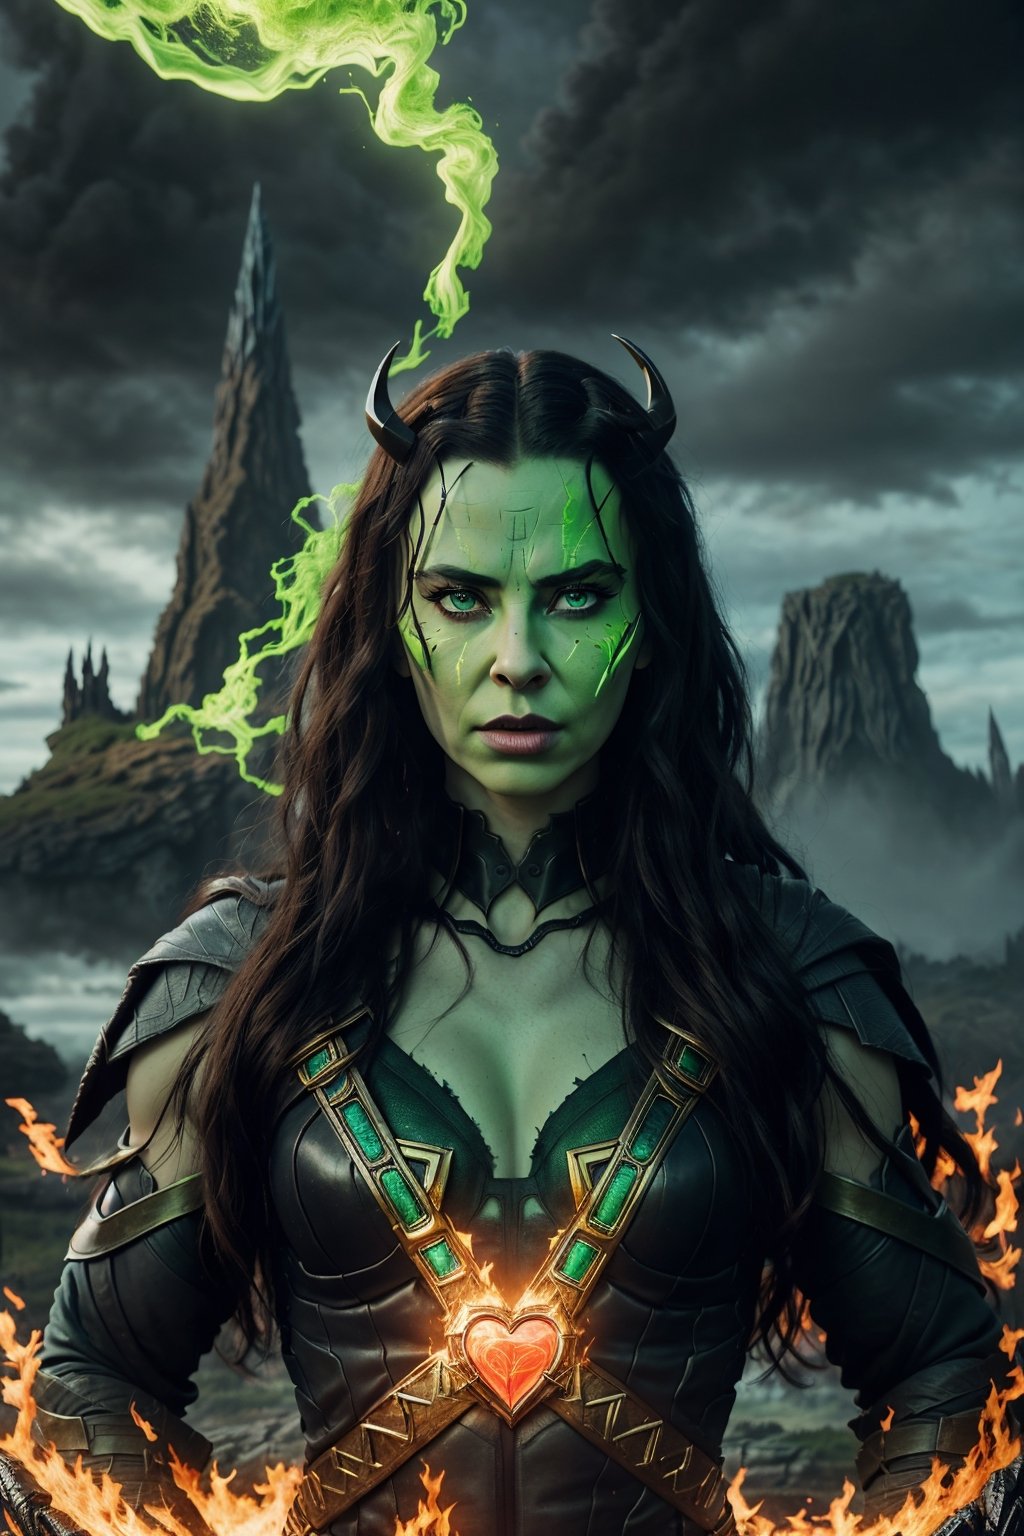 A breathtaking 4K ultra-realistic scene unfolds, (A furious and enraged Hela Asgard radiates a blazing green aura:1.3), Locked in a fierce clash against an overwhelmingly powerful adversary, (Set against the backdrop of Asgard city in all its majestic glory:1.3), Every detail meticulously rendered, from Hela's menacing presence to the intricate architecture of Asgard, creating a cinematic masterpiece that immerses you in the heart of the battle.